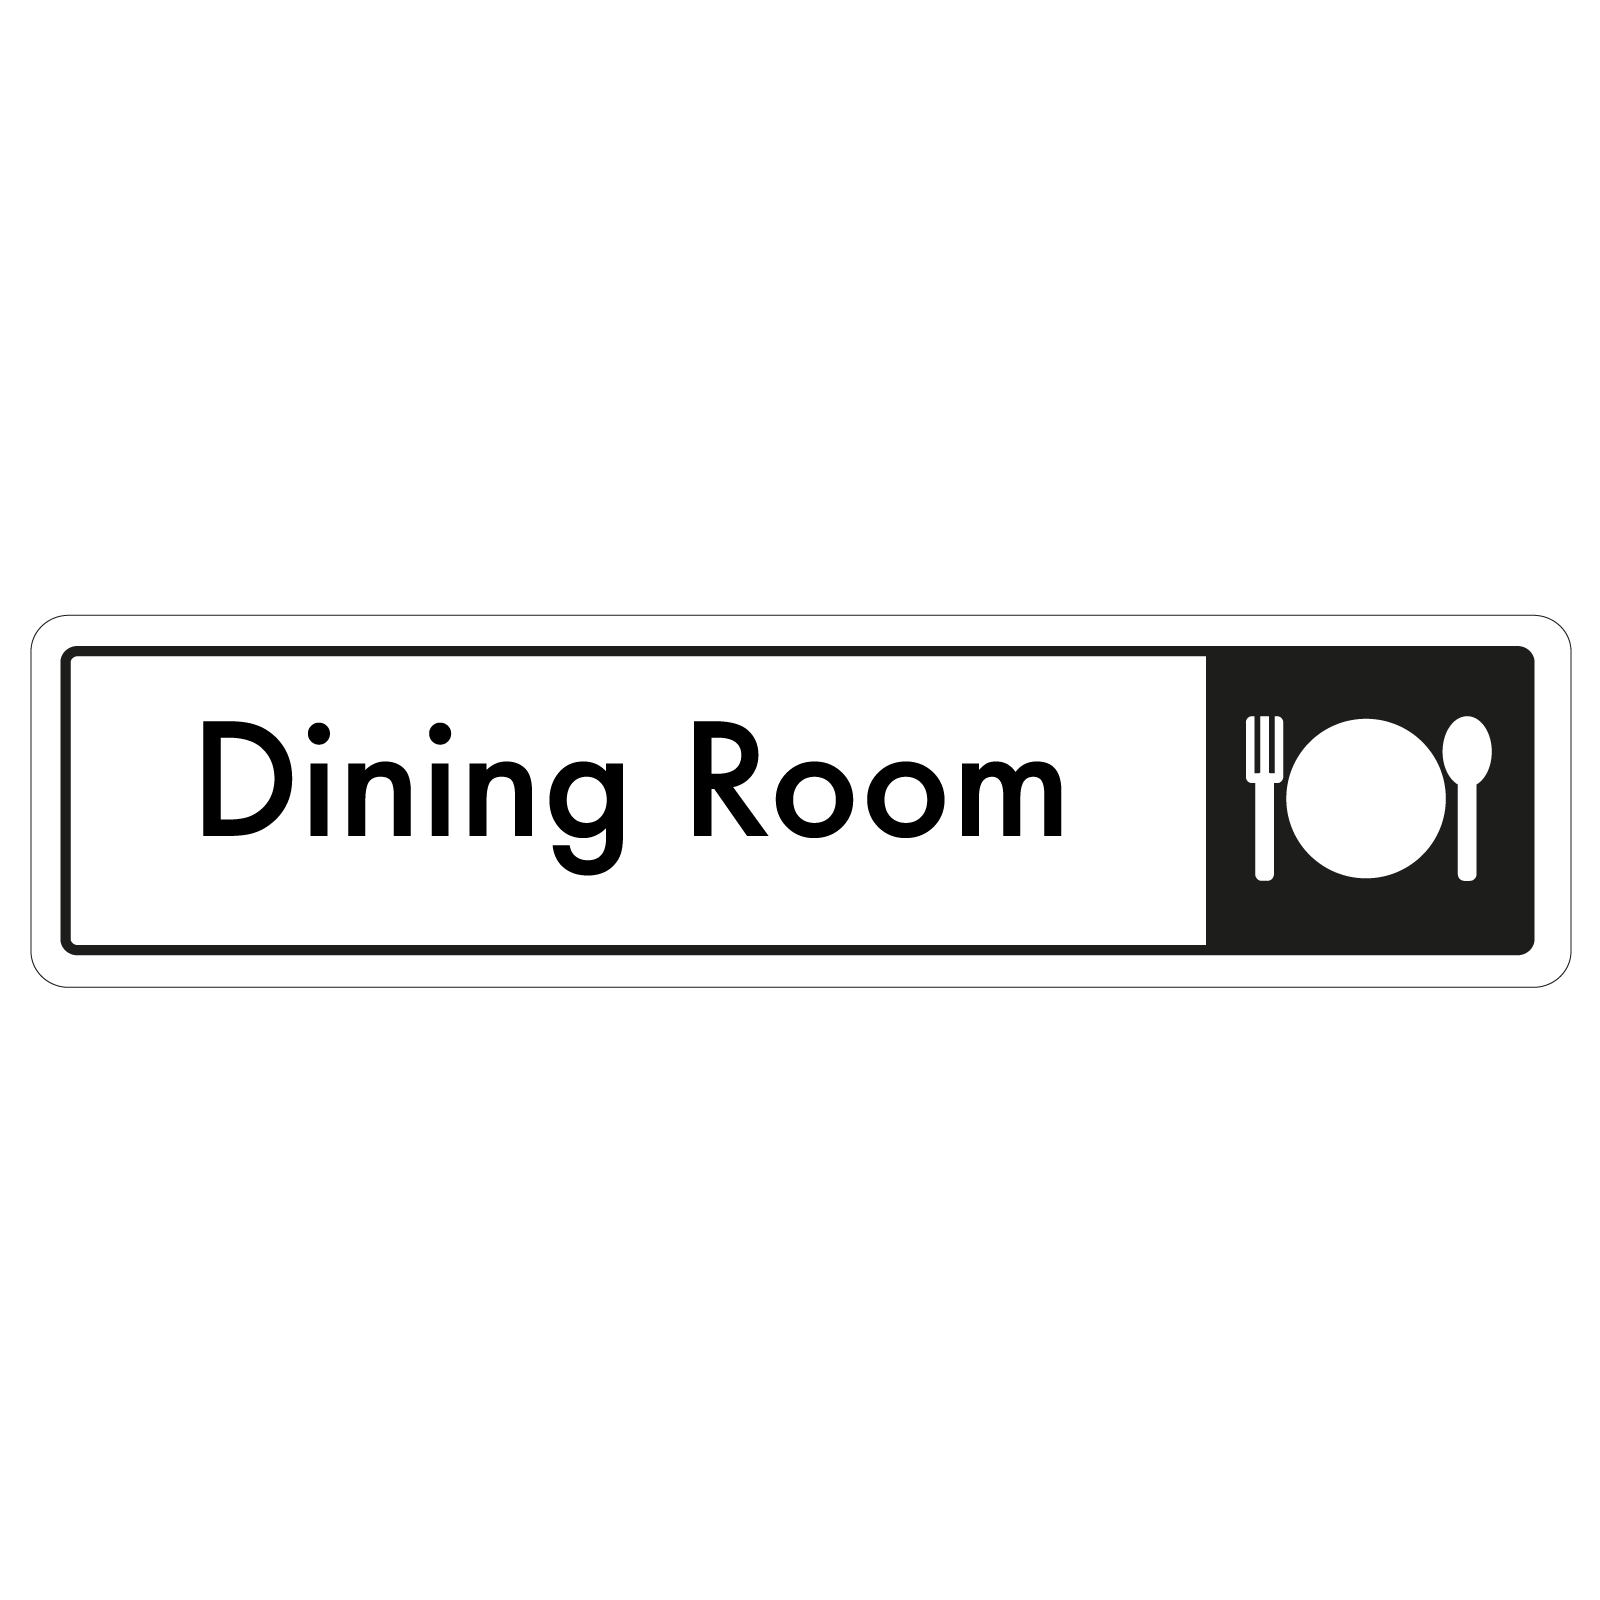 Dining Room Door Sign - Black on White 